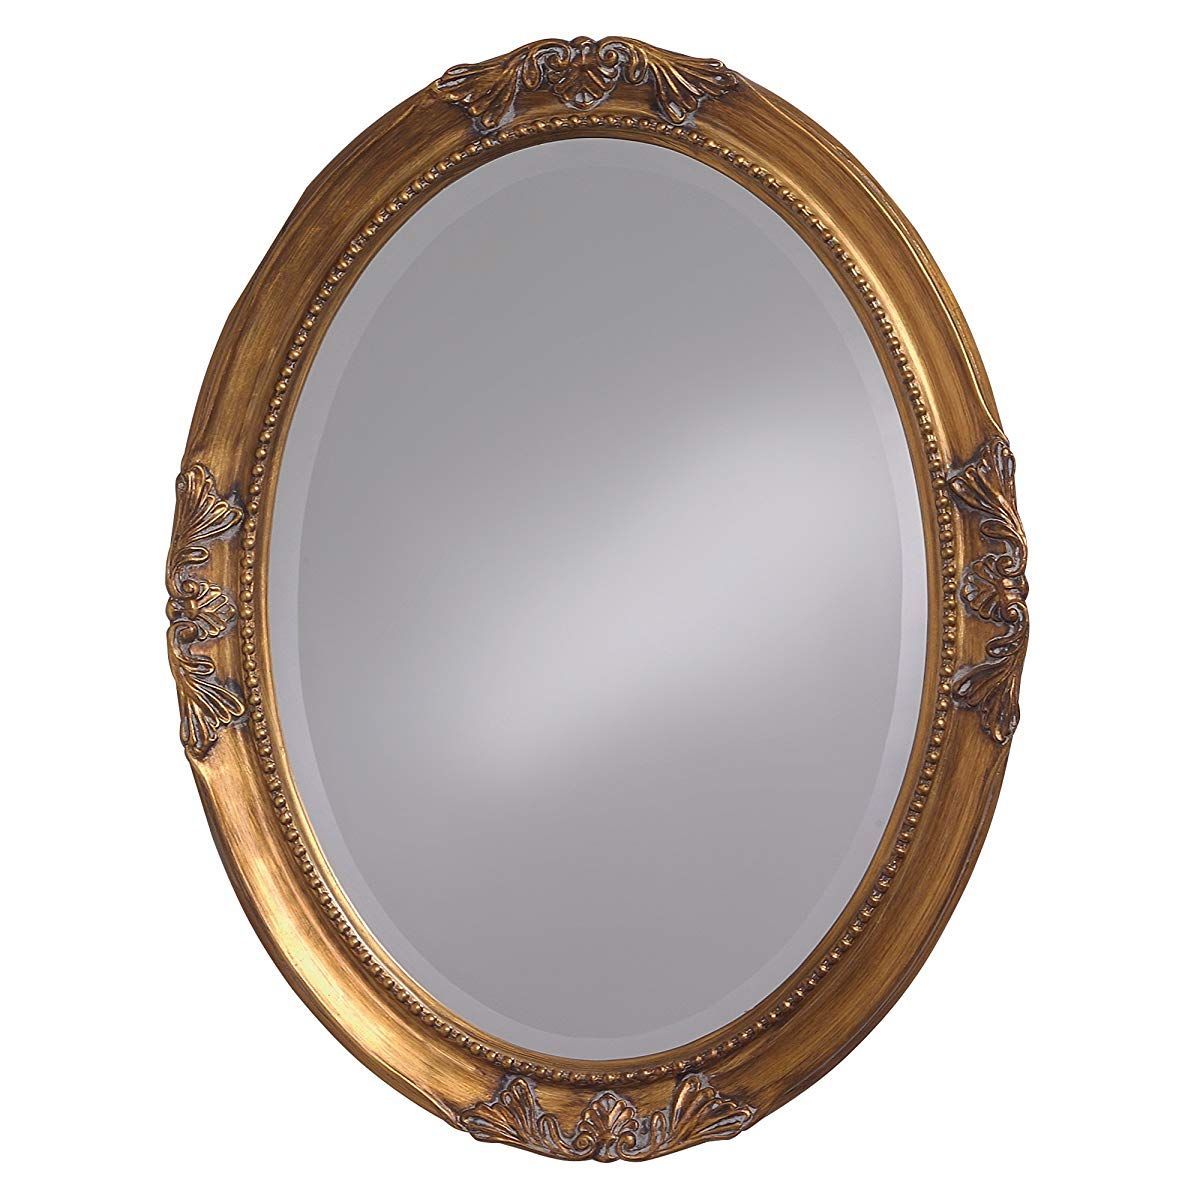 Hanging Beveled Oval Wall Mirror, Antique Gold Leaf | Antique Gold With Regard To Antique Gold Leaf Round Oversized Wall Mirrors (View 1 of 15)